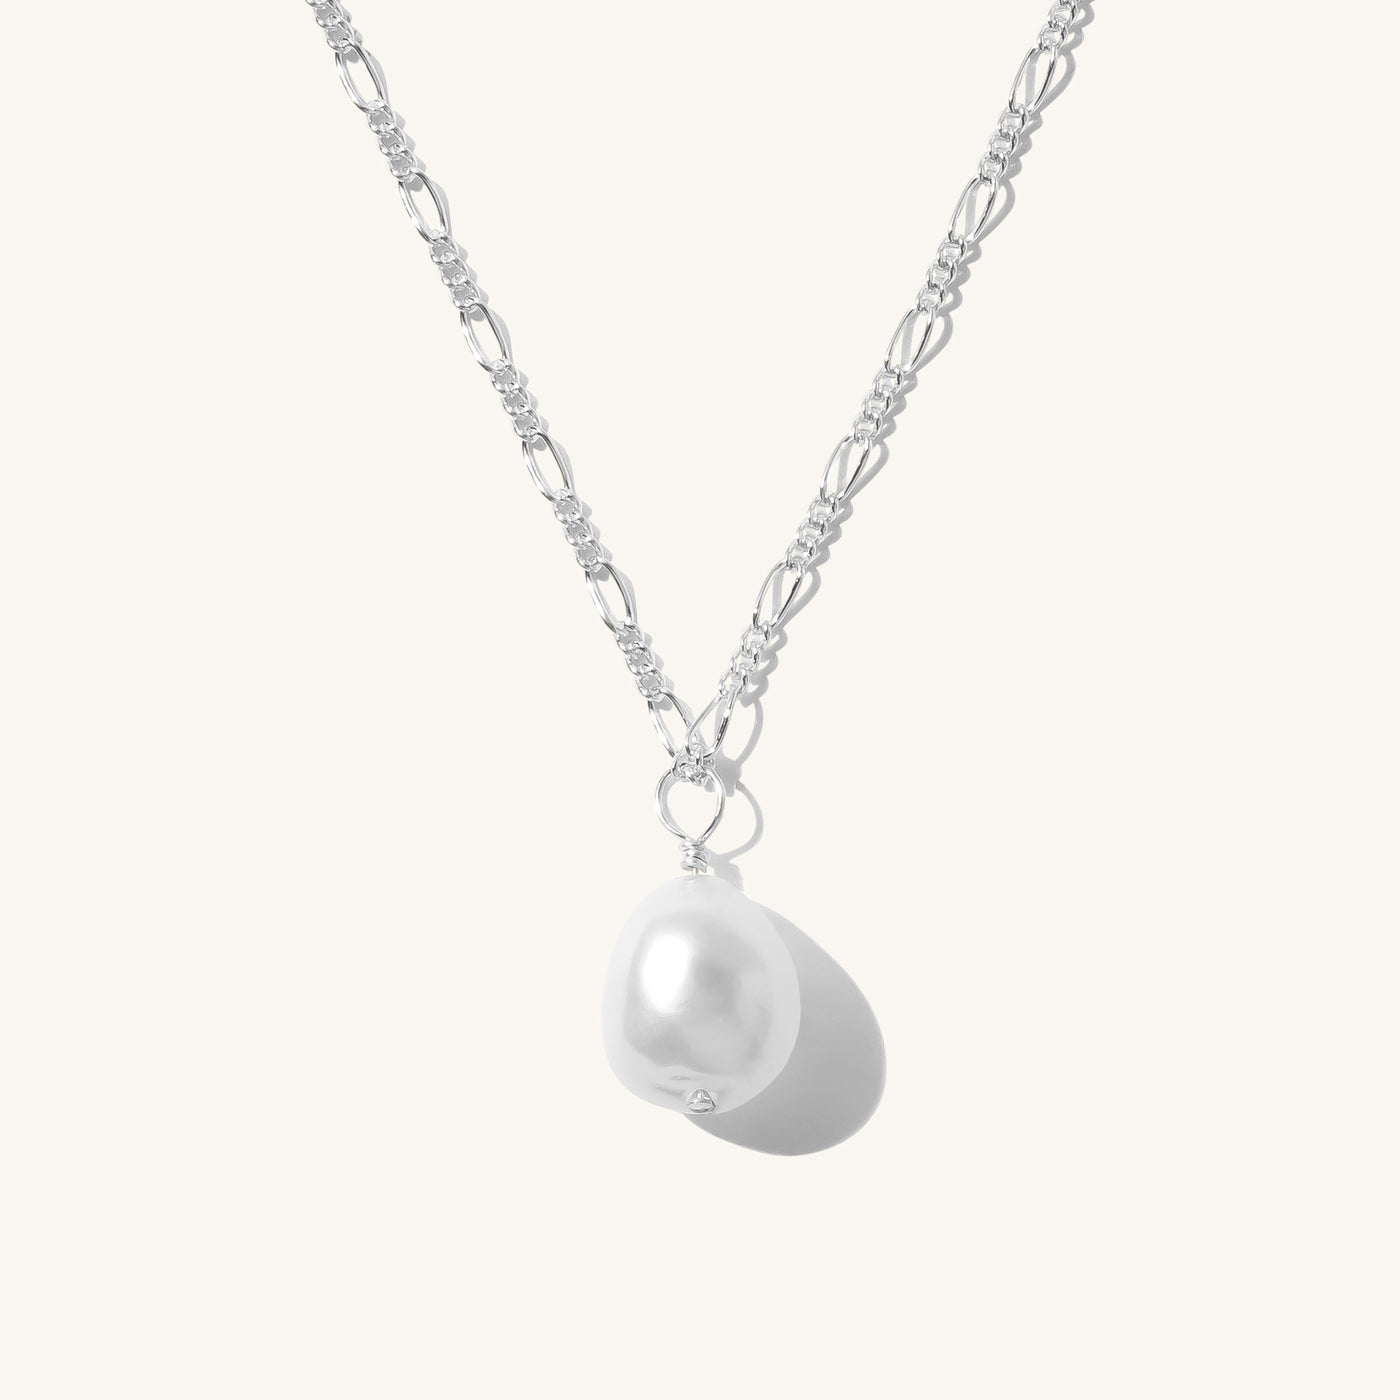 Baroque Pearl Necklace | Simple & Dainty Jewelry